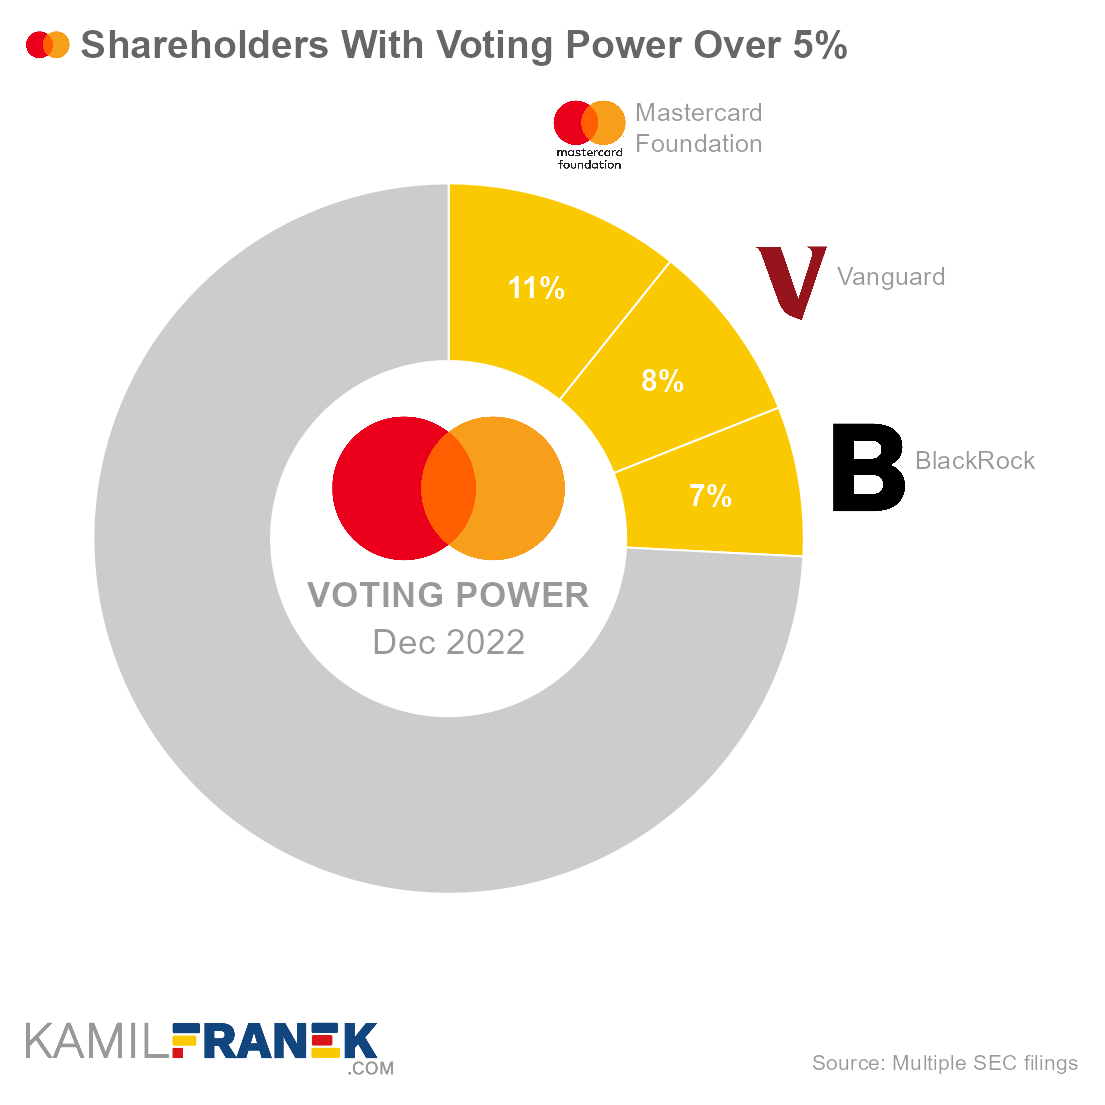 Who controls Mastercard, largest shareholders donut chart